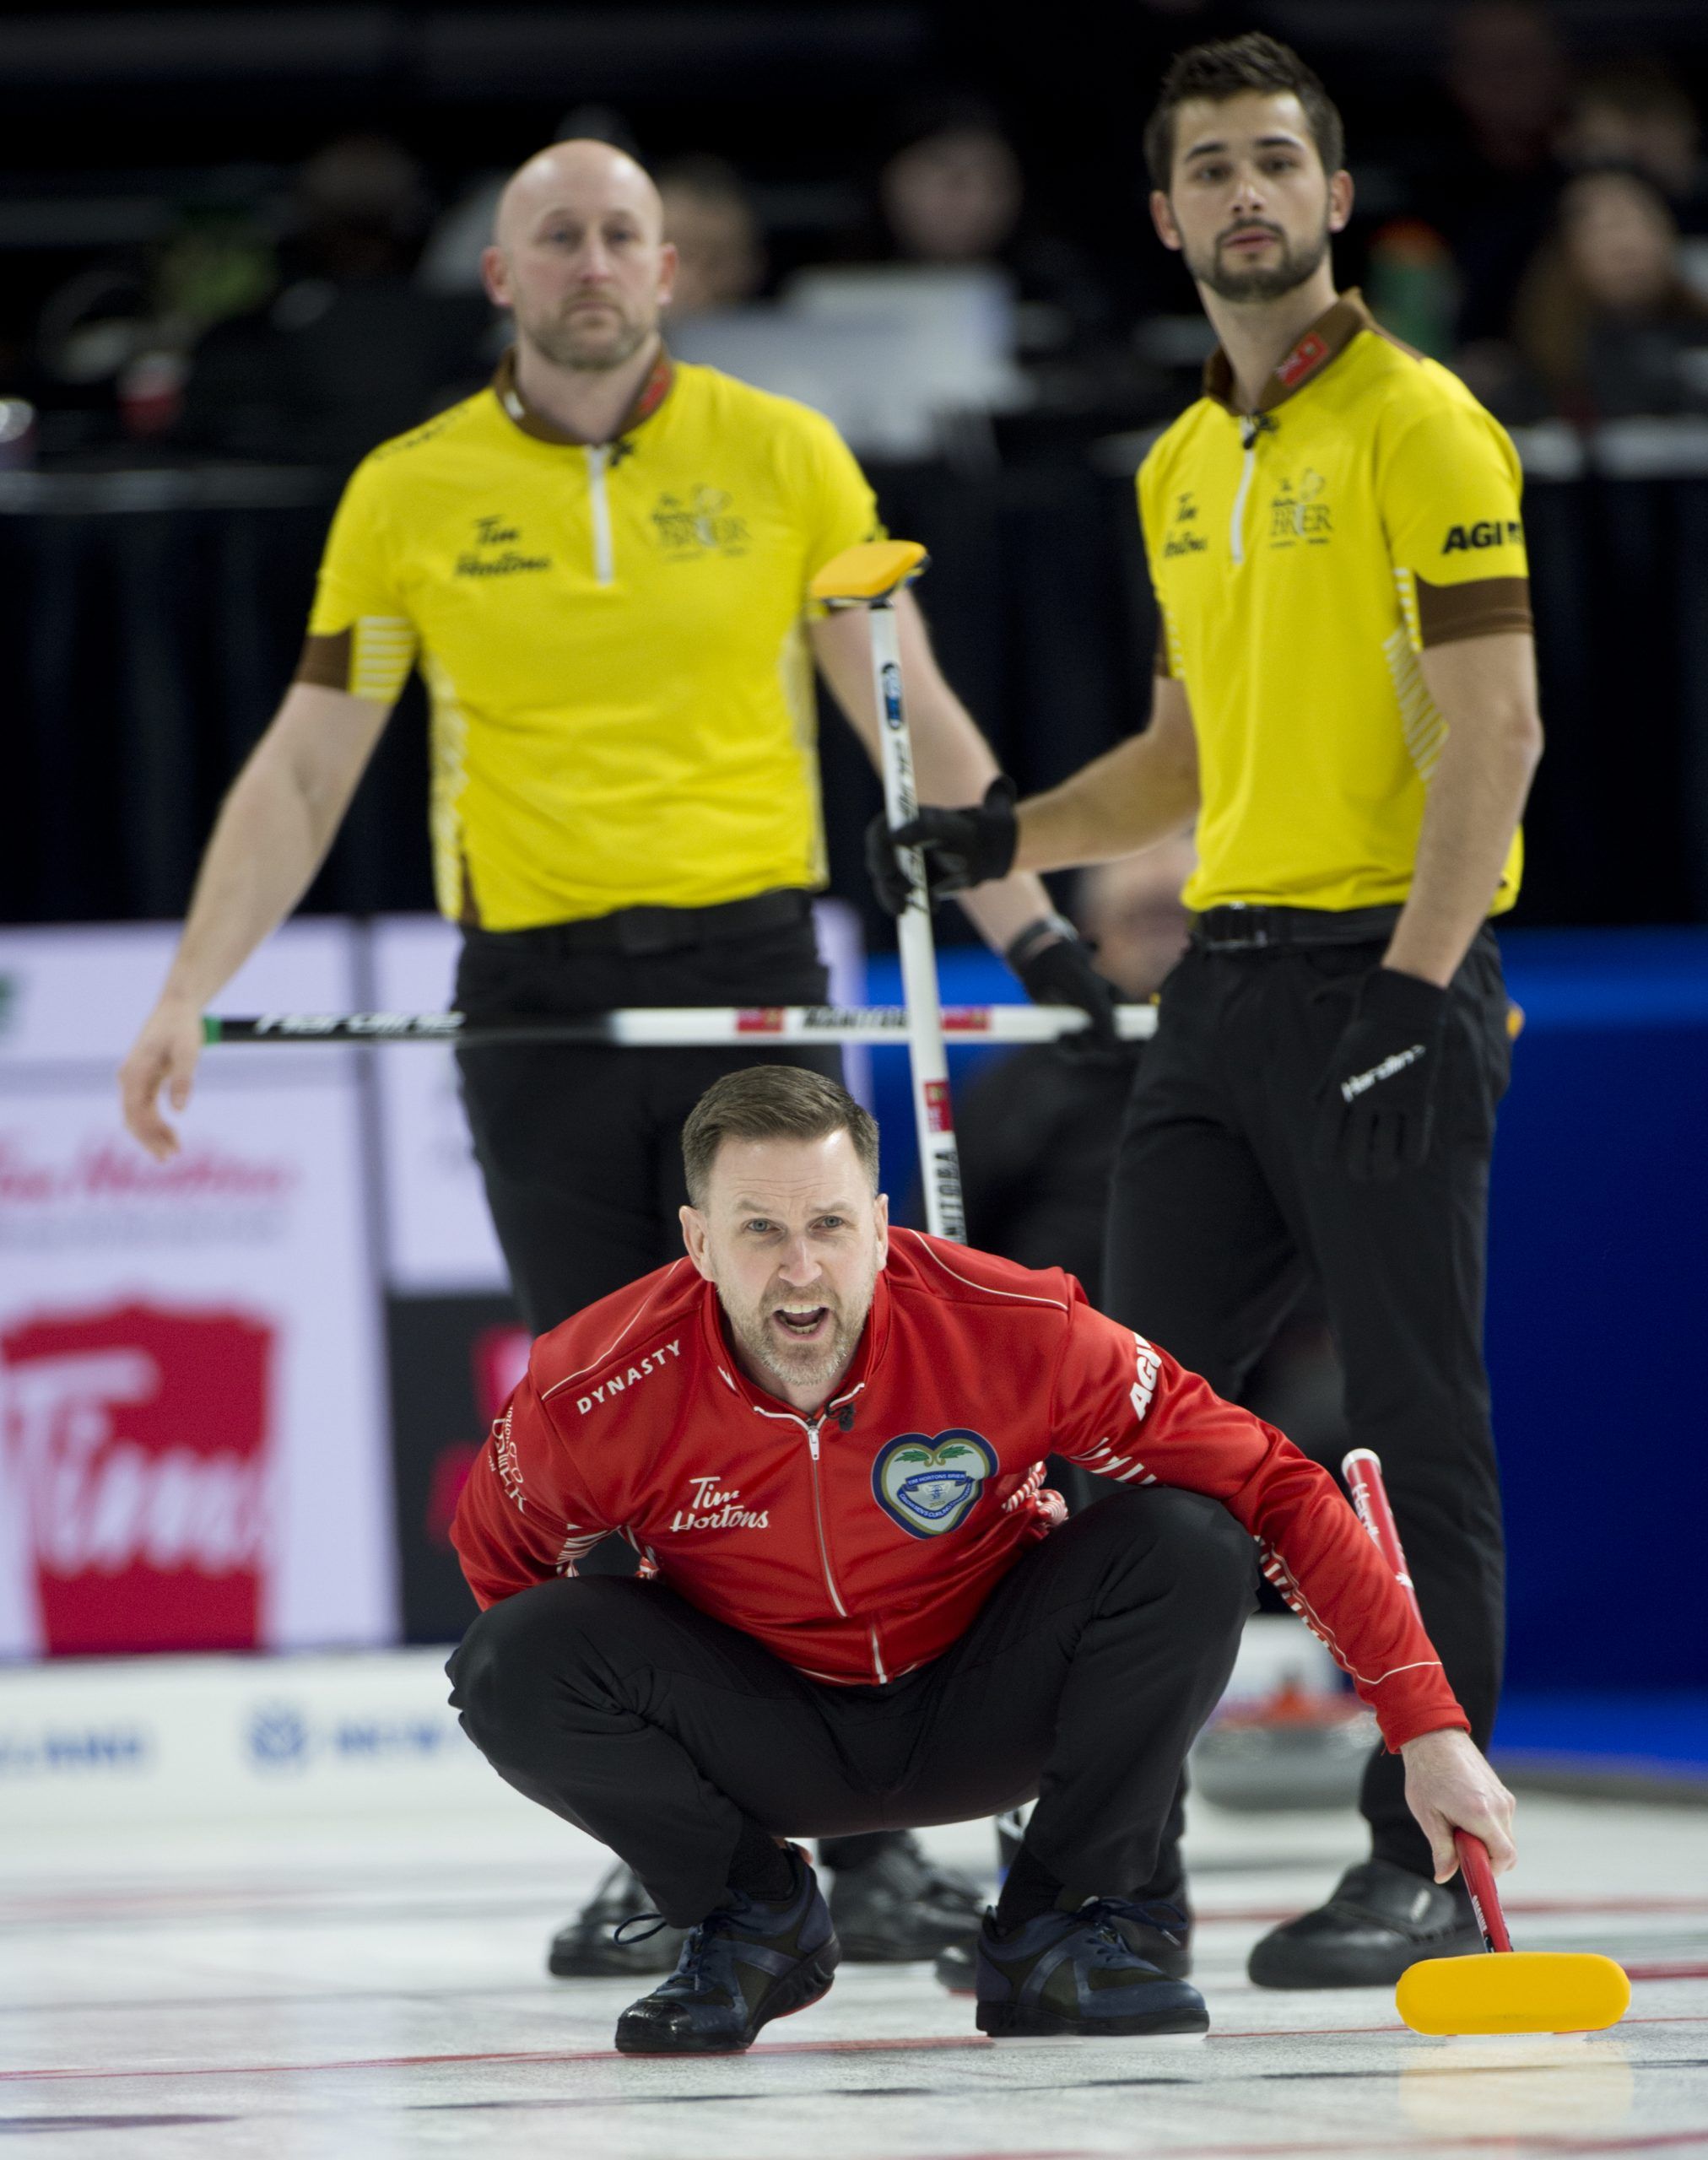 world curling tour st catharines